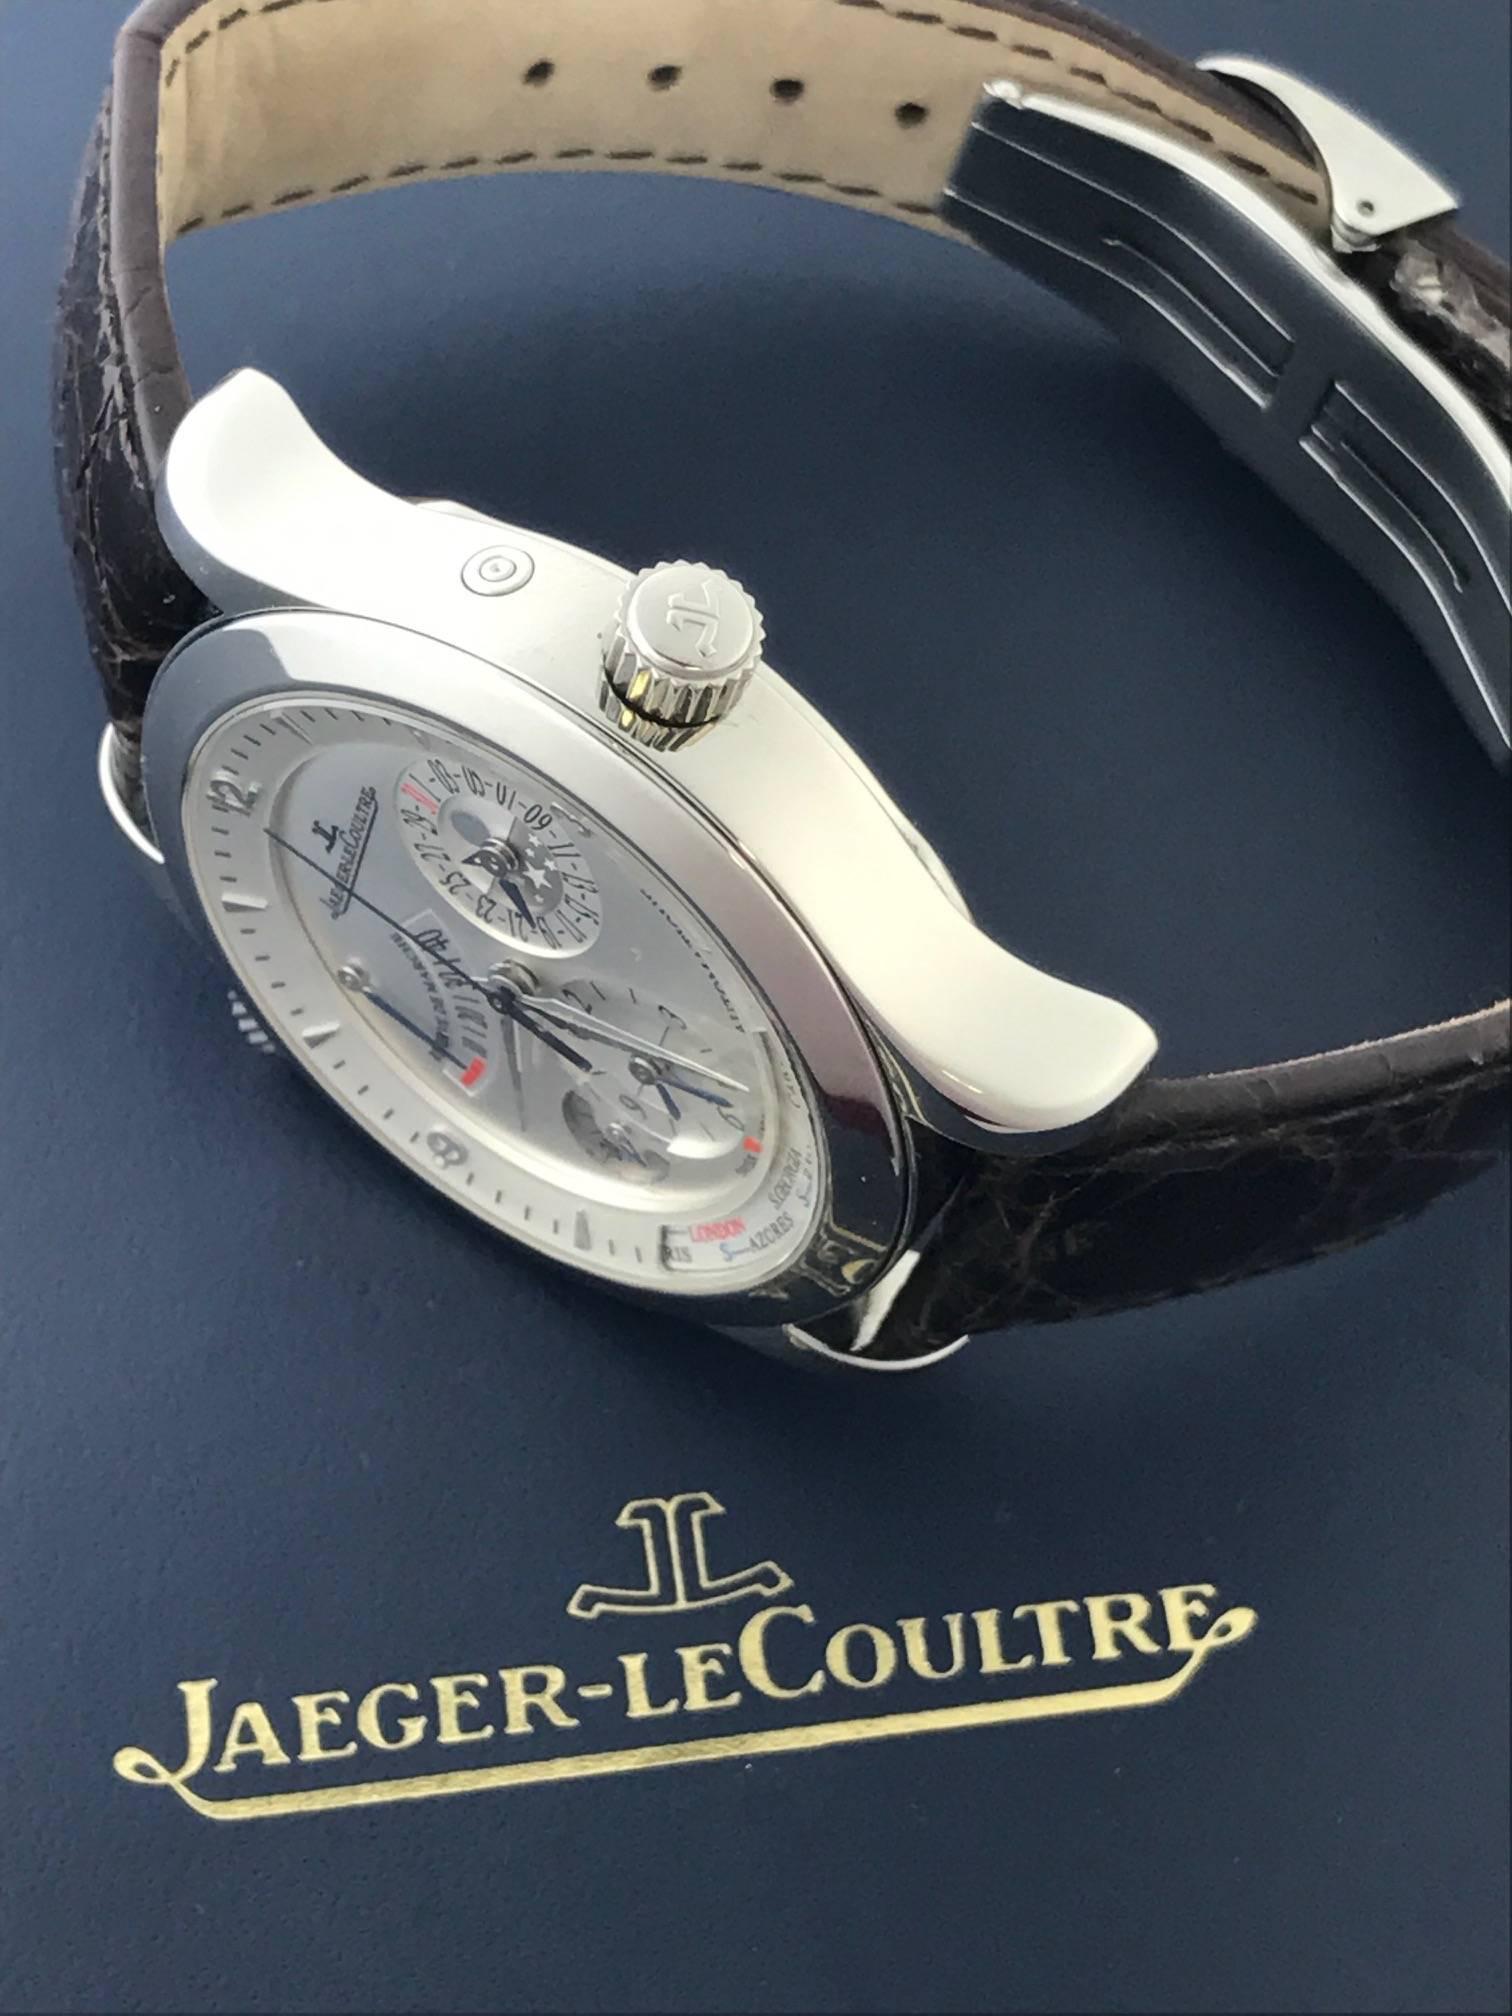 The Jaeger-LeCoultre Master Geographique Model 150.84.20 certified pre-owned contemporary mens wrist watch. The World Time complication features 24 Cities/Dual Time Zone/Power Reserve Indicator/AM - PM Indicator and date functionality. Beautiful